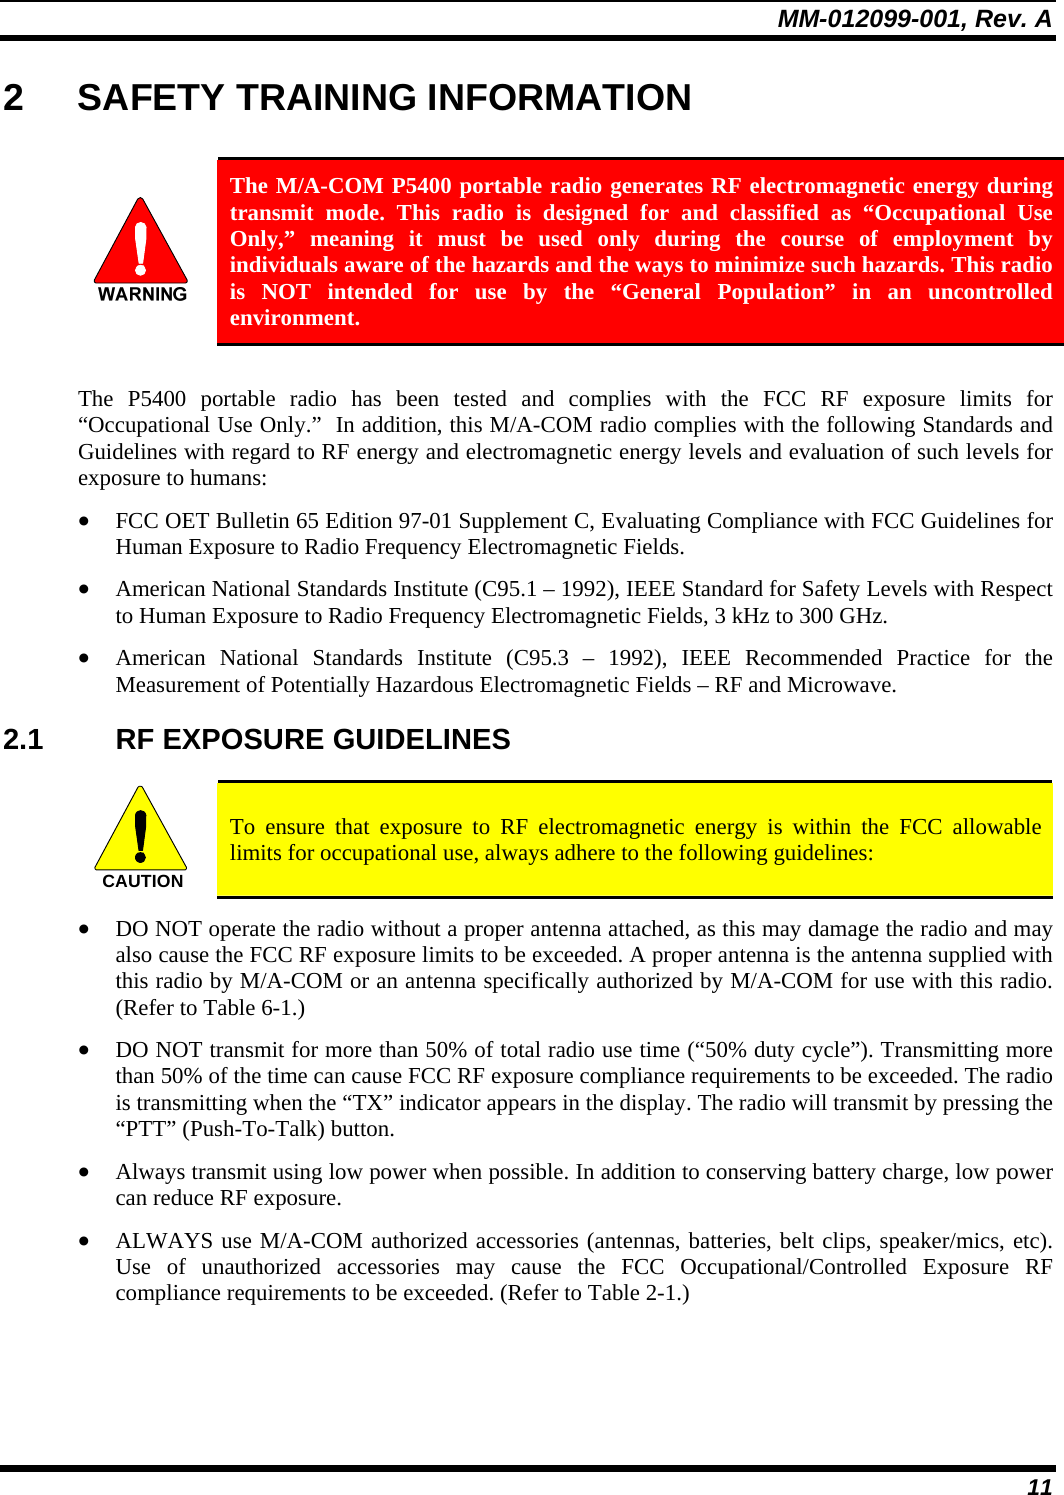 MM-012099-001, Rev. A 11 2  SAFETY TRAINING INFORMATION   The M/A-COM P5400 portable radio generates RF electromagnetic energy during transmit mode. This radio is designed for and classified as “Occupational Use Only,” meaning it must be used only during the course of employment by individuals aware of the hazards and the ways to minimize such hazards. This radio is NOT intended for use by the “General Population” in an uncontrolled environment.  The P5400 portable radio has been tested and complies with the FCC RF exposure limits for “Occupational Use Only.”  In addition, this M/A-COM radio complies with the following Standards and Guidelines with regard to RF energy and electromagnetic energy levels and evaluation of such levels for exposure to humans: • FCC OET Bulletin 65 Edition 97-01 Supplement C, Evaluating Compliance with FCC Guidelines for Human Exposure to Radio Frequency Electromagnetic Fields. • American National Standards Institute (C95.1 – 1992), IEEE Standard for Safety Levels with Respect to Human Exposure to Radio Frequency Electromagnetic Fields, 3 kHz to 300 GHz. • American National Standards Institute (C95.3 – 1992), IEEE Recommended Practice for the Measurement of Potentially Hazardous Electromagnetic Fields – RF and Microwave. 2.1 RF EXPOSURE GUIDELINES  CAUTION  To ensure that exposure to RF electromagnetic energy is within the FCC allowable limits for occupational use, always adhere to the following guidelines: • DO NOT operate the radio without a proper antenna attached, as this may damage the radio and may also cause the FCC RF exposure limits to be exceeded. A proper antenna is the antenna supplied with this radio by M/A-COM or an antenna specifically authorized by M/A-COM for use with this radio. (Refer to Table 6-1.) • DO NOT transmit for more than 50% of total radio use time (“50% duty cycle”). Transmitting more than 50% of the time can cause FCC RF exposure compliance requirements to be exceeded. The radio is transmitting when the “TX” indicator appears in the display. The radio will transmit by pressing the “PTT” (Push-To-Talk) button. • Always transmit using low power when possible. In addition to conserving battery charge, low power can reduce RF exposure. • ALWAYS use M/A-COM authorized accessories (antennas, batteries, belt clips, speaker/mics, etc). Use of unauthorized accessories may cause the FCC Occupational/Controlled Exposure RF compliance requirements to be exceeded. (Refer to Table 2-1.) 